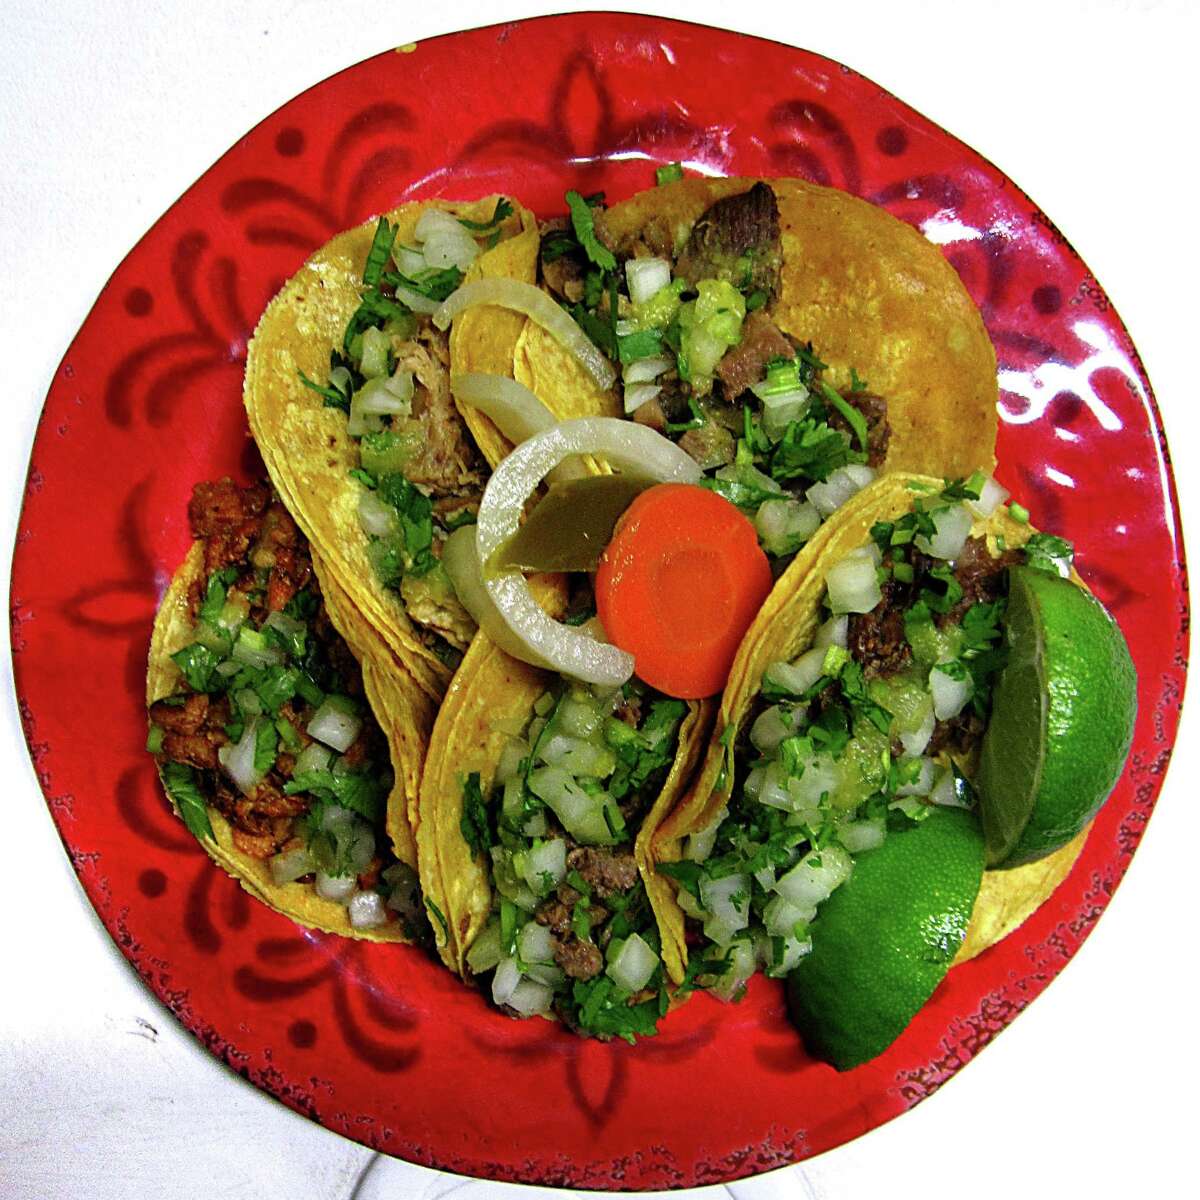 Tacos of the Week: $1 street tacos with asada, lengua, carnitas, pastor and cabeza on doubled-up corn tortillas with onions, cilantro, limes and escabeche from Tacos La Salsita truck.